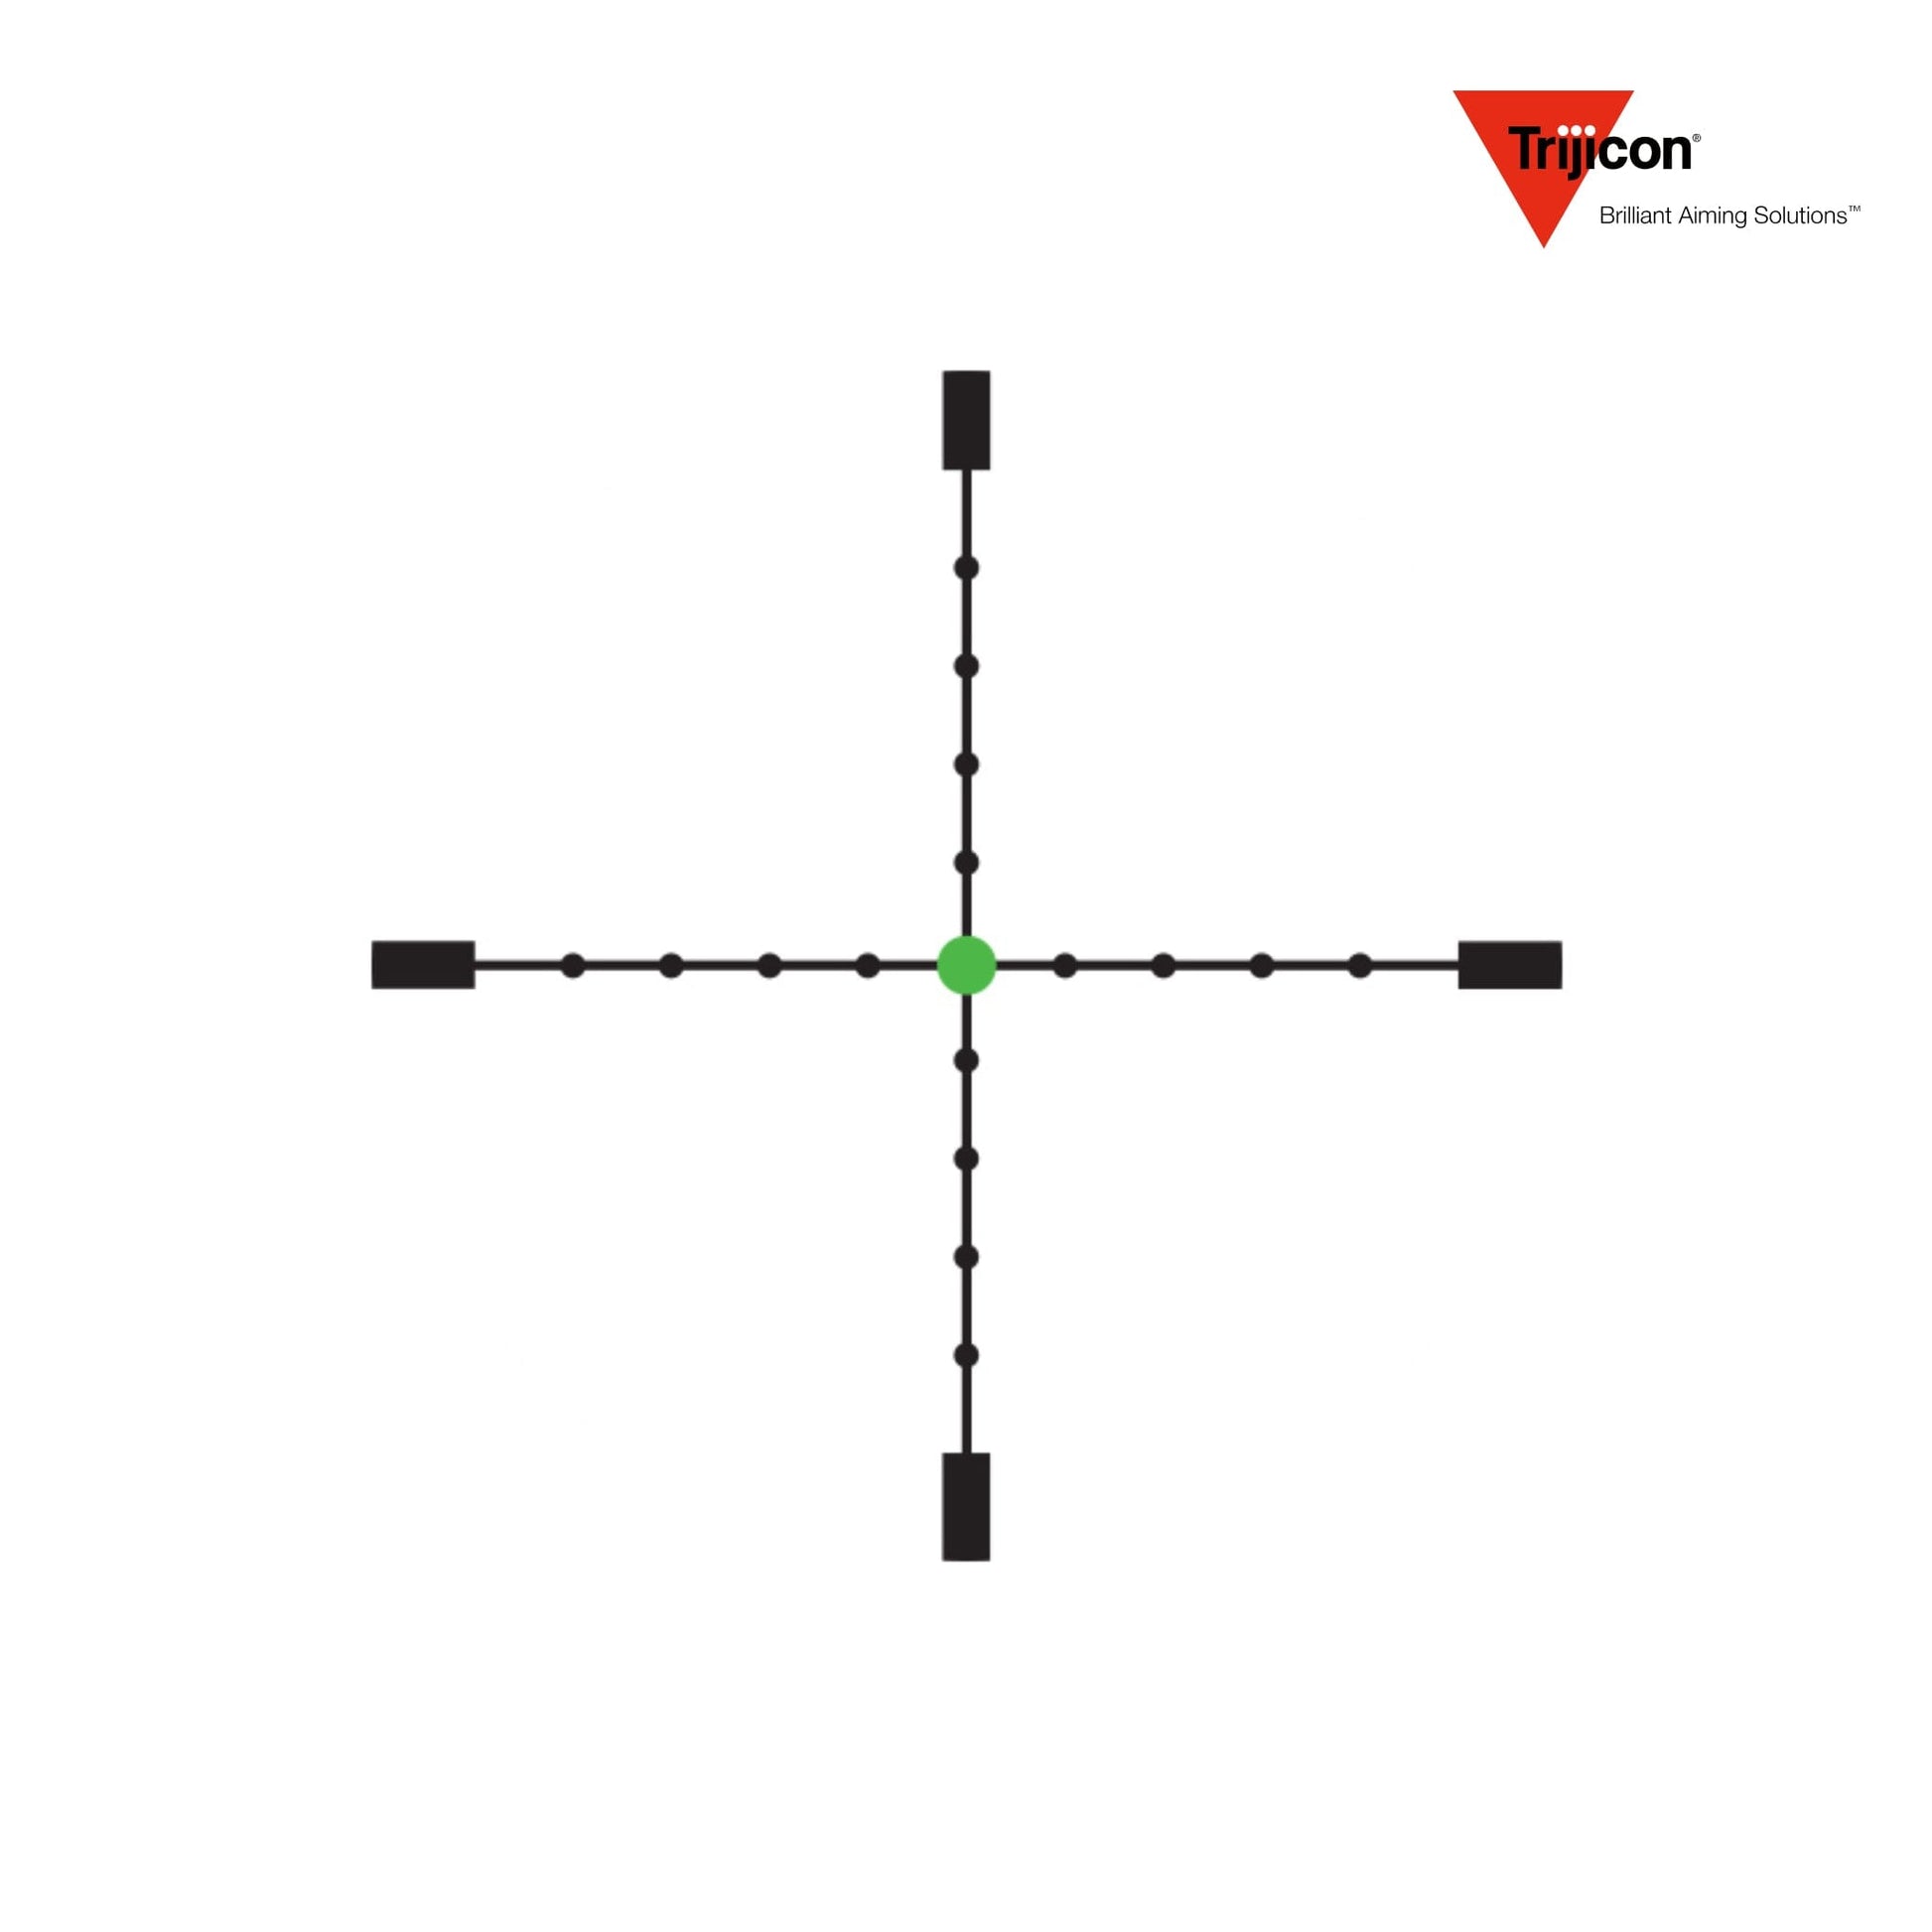 Trijicon AccuPoint 2.5-10x56 Rifle Scope MIL-Dot Crosshair with Green Dot Reticle TR22-2G Rifle Scope Trijicon 